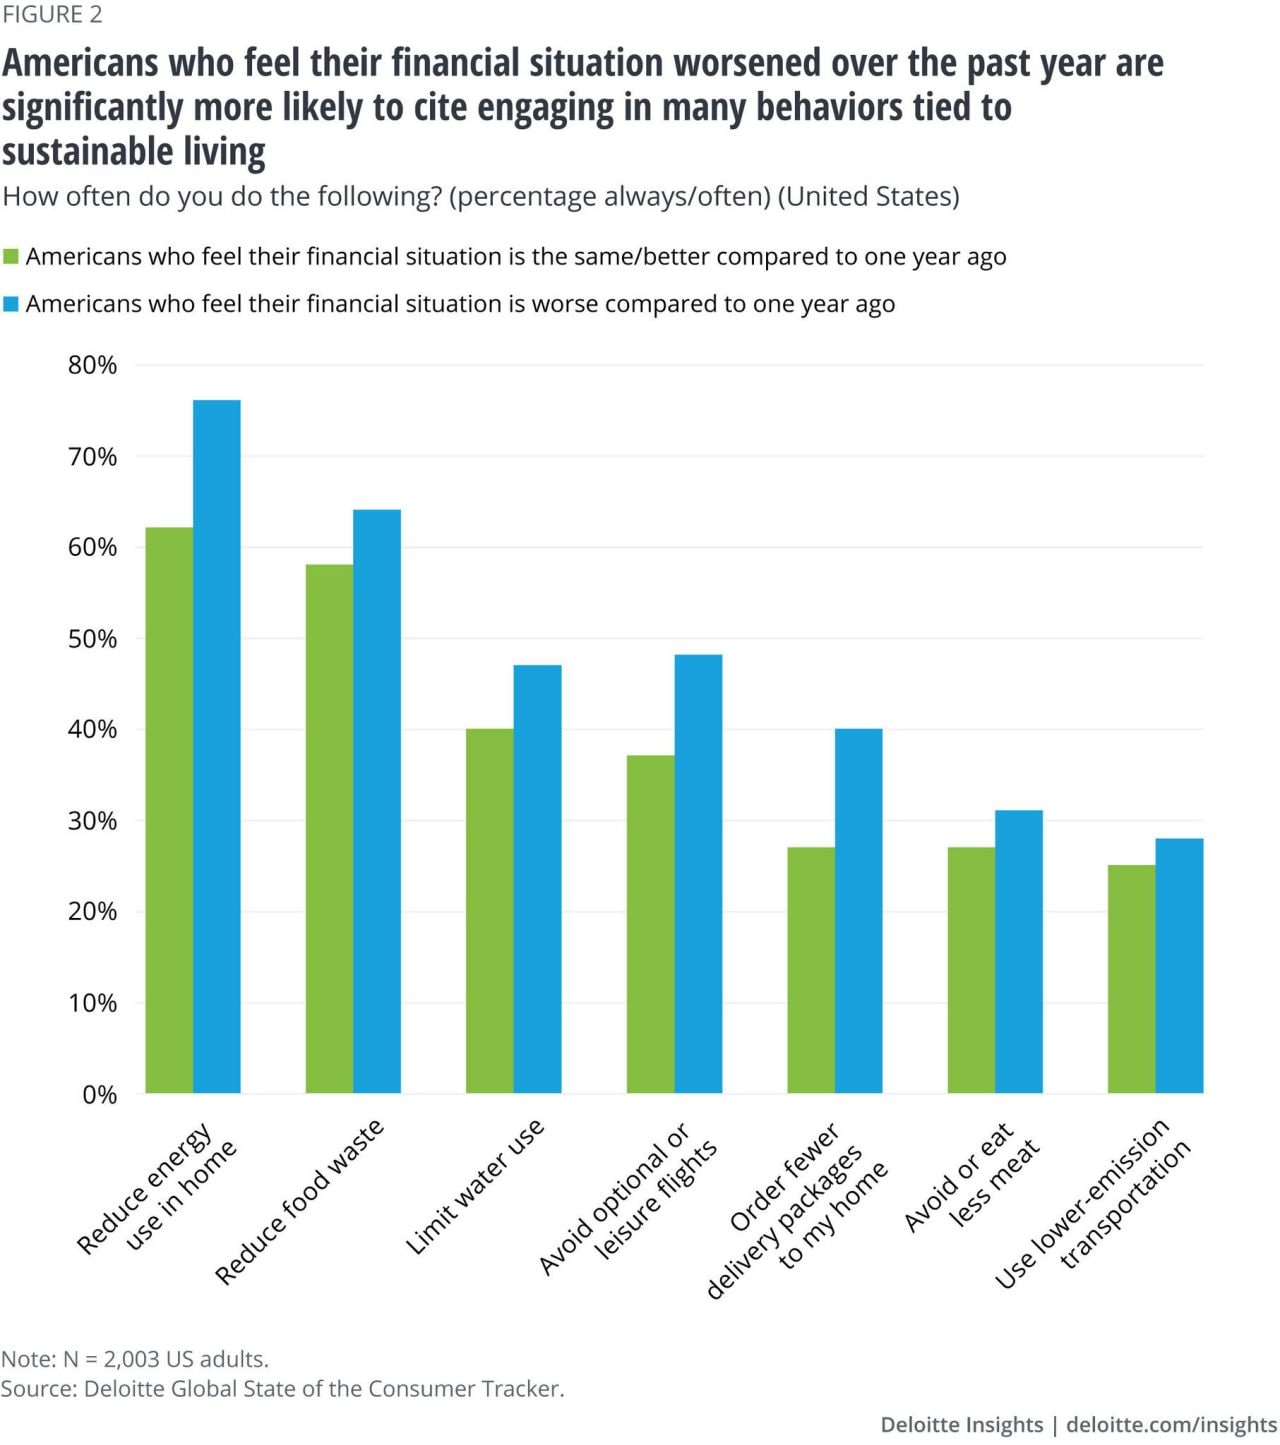 Figure 2: Americans who feel their financial situation worsened over the past year are significantly more likely to cite engaging in many behaviors tied to sustainable living